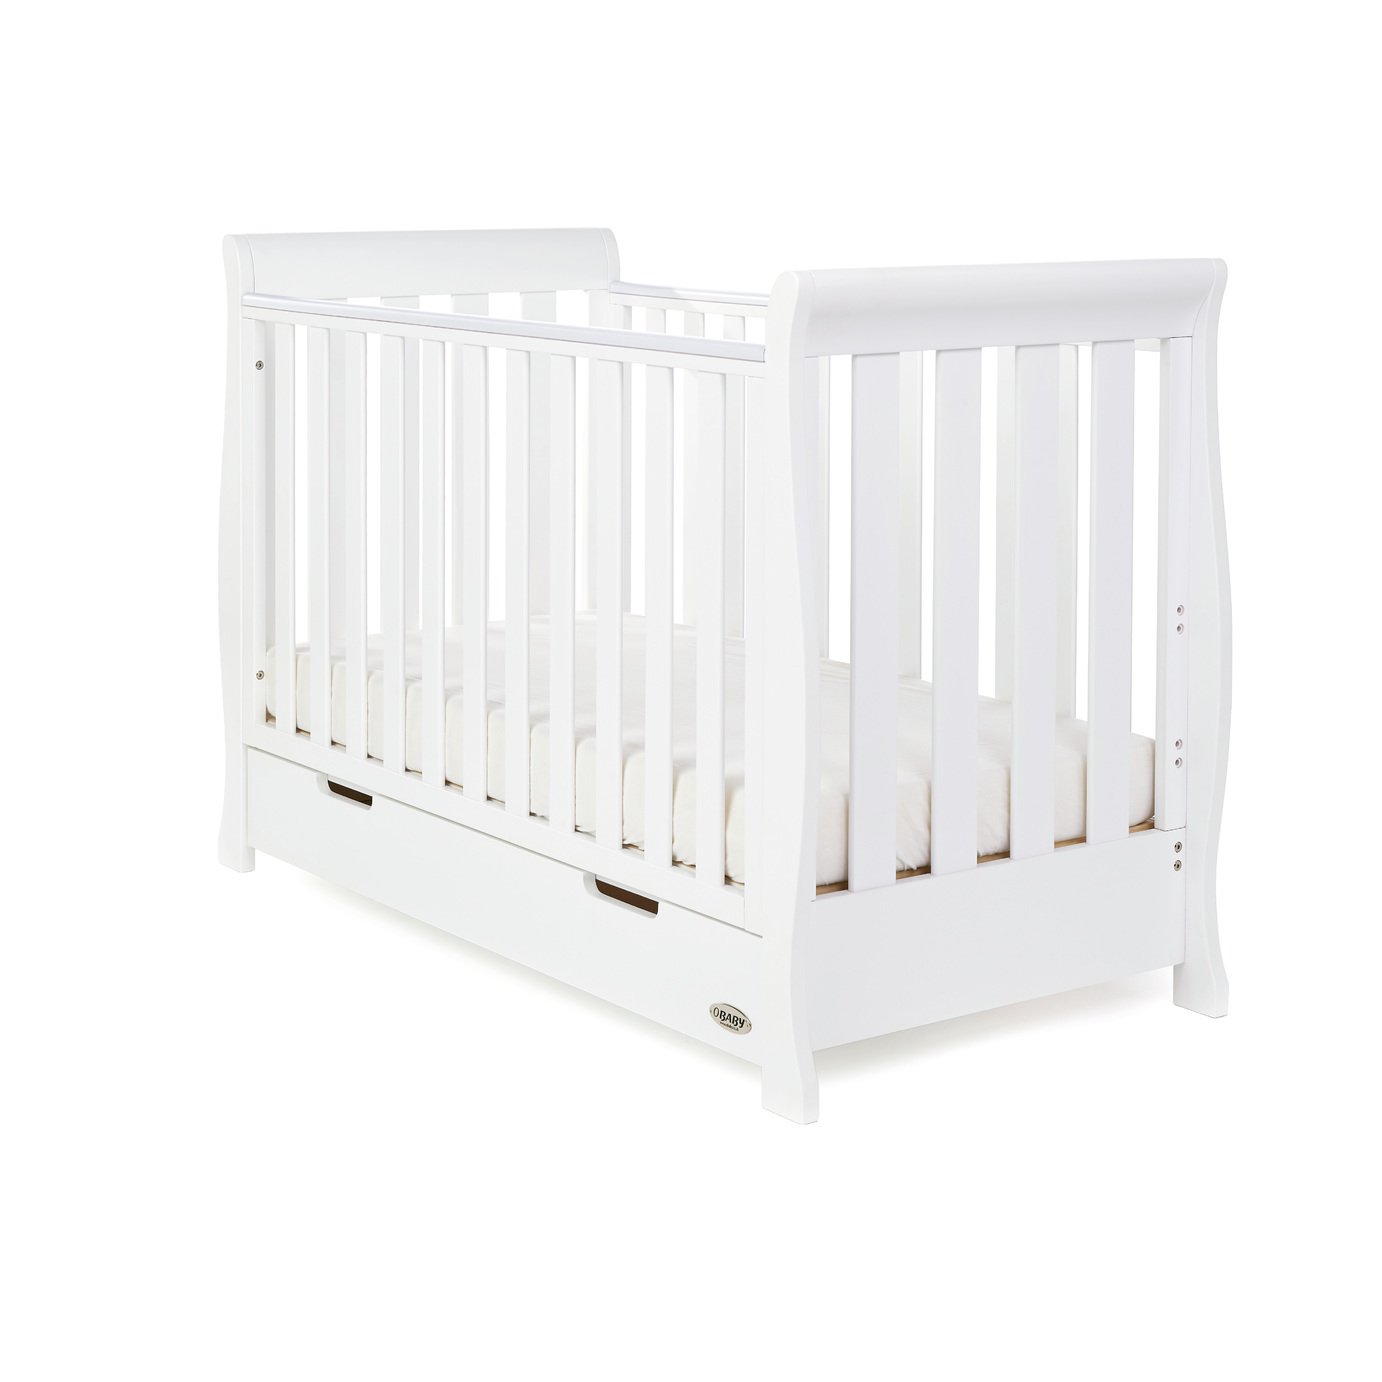 Obaby Stamford Mini Sleigh Cot Bed Review